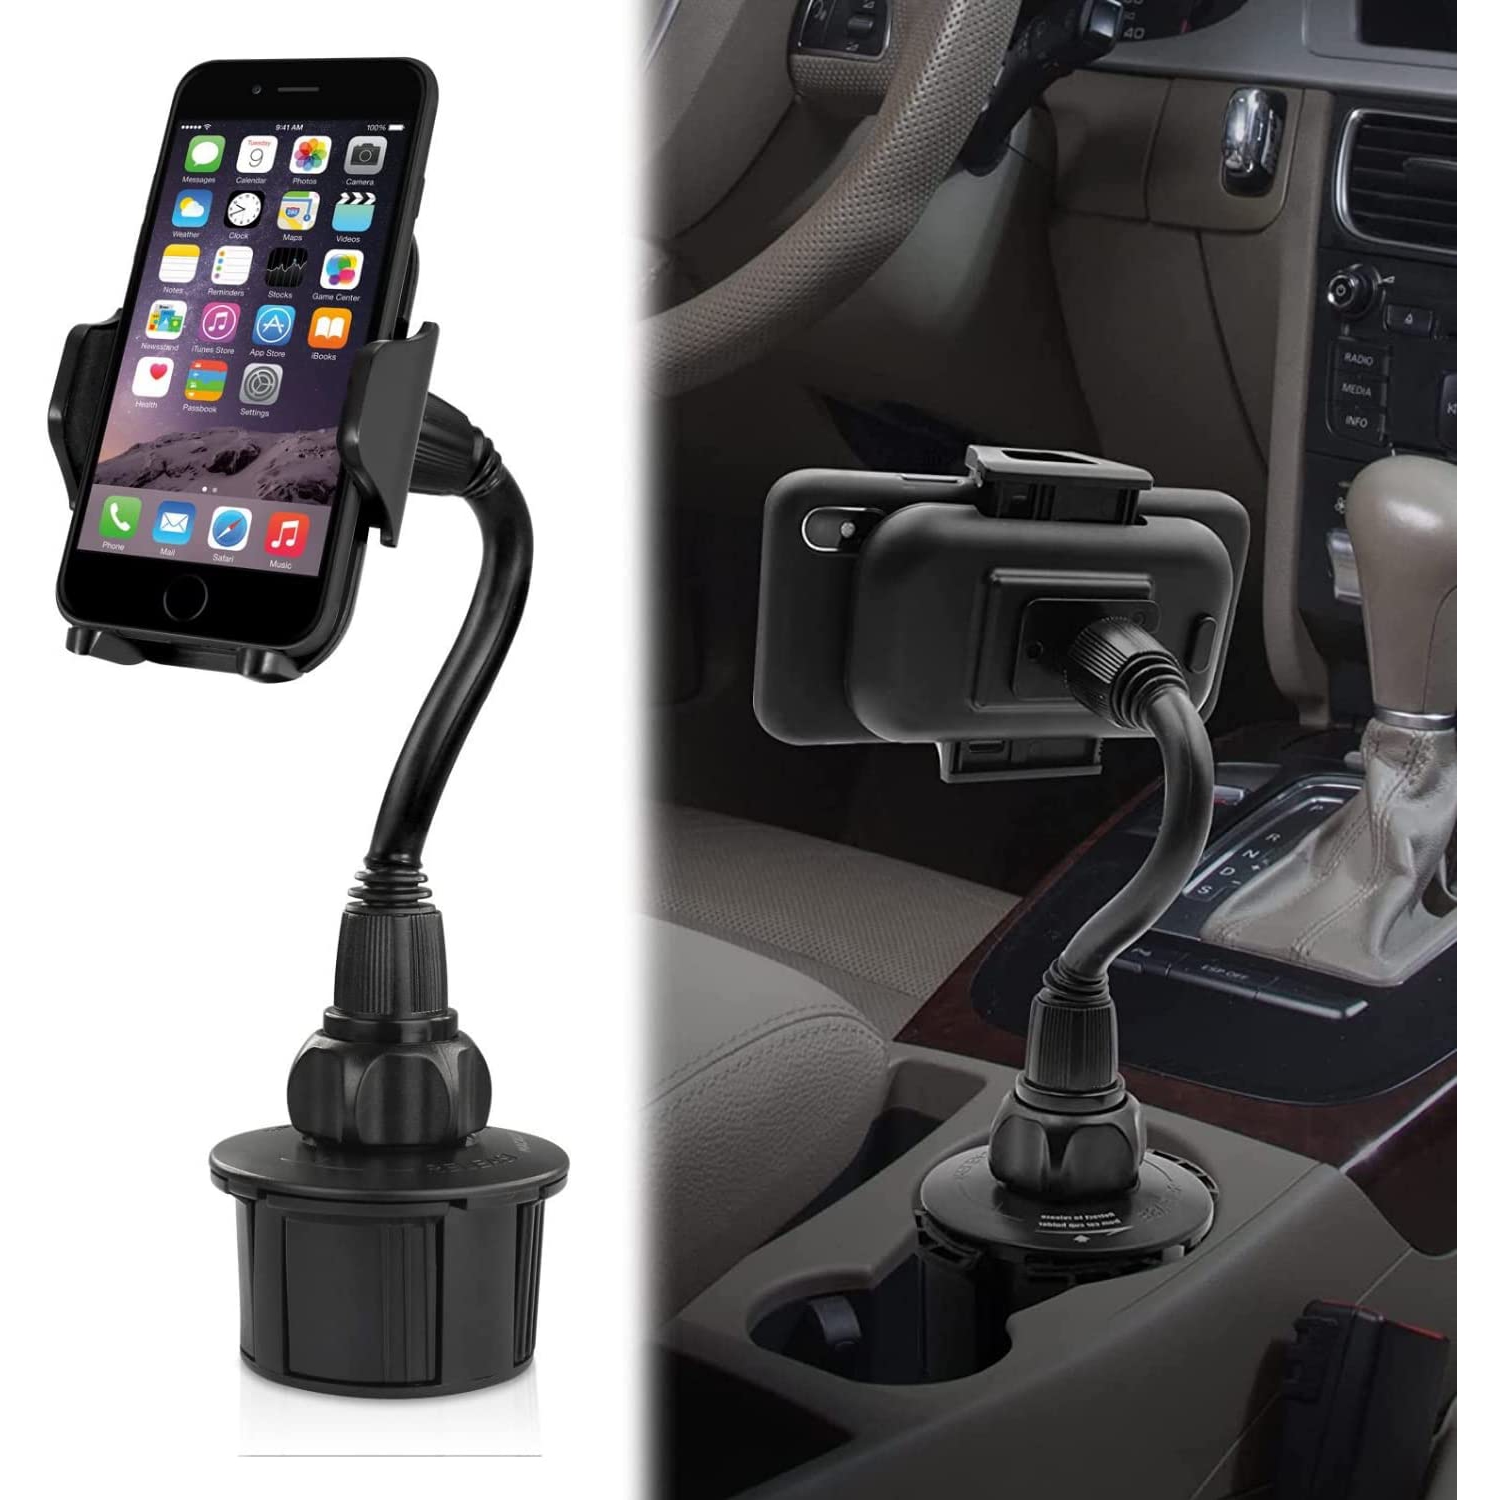 Car Cup Holder Phone Mount - Secure Fit for Phones up to 4.1' Wide